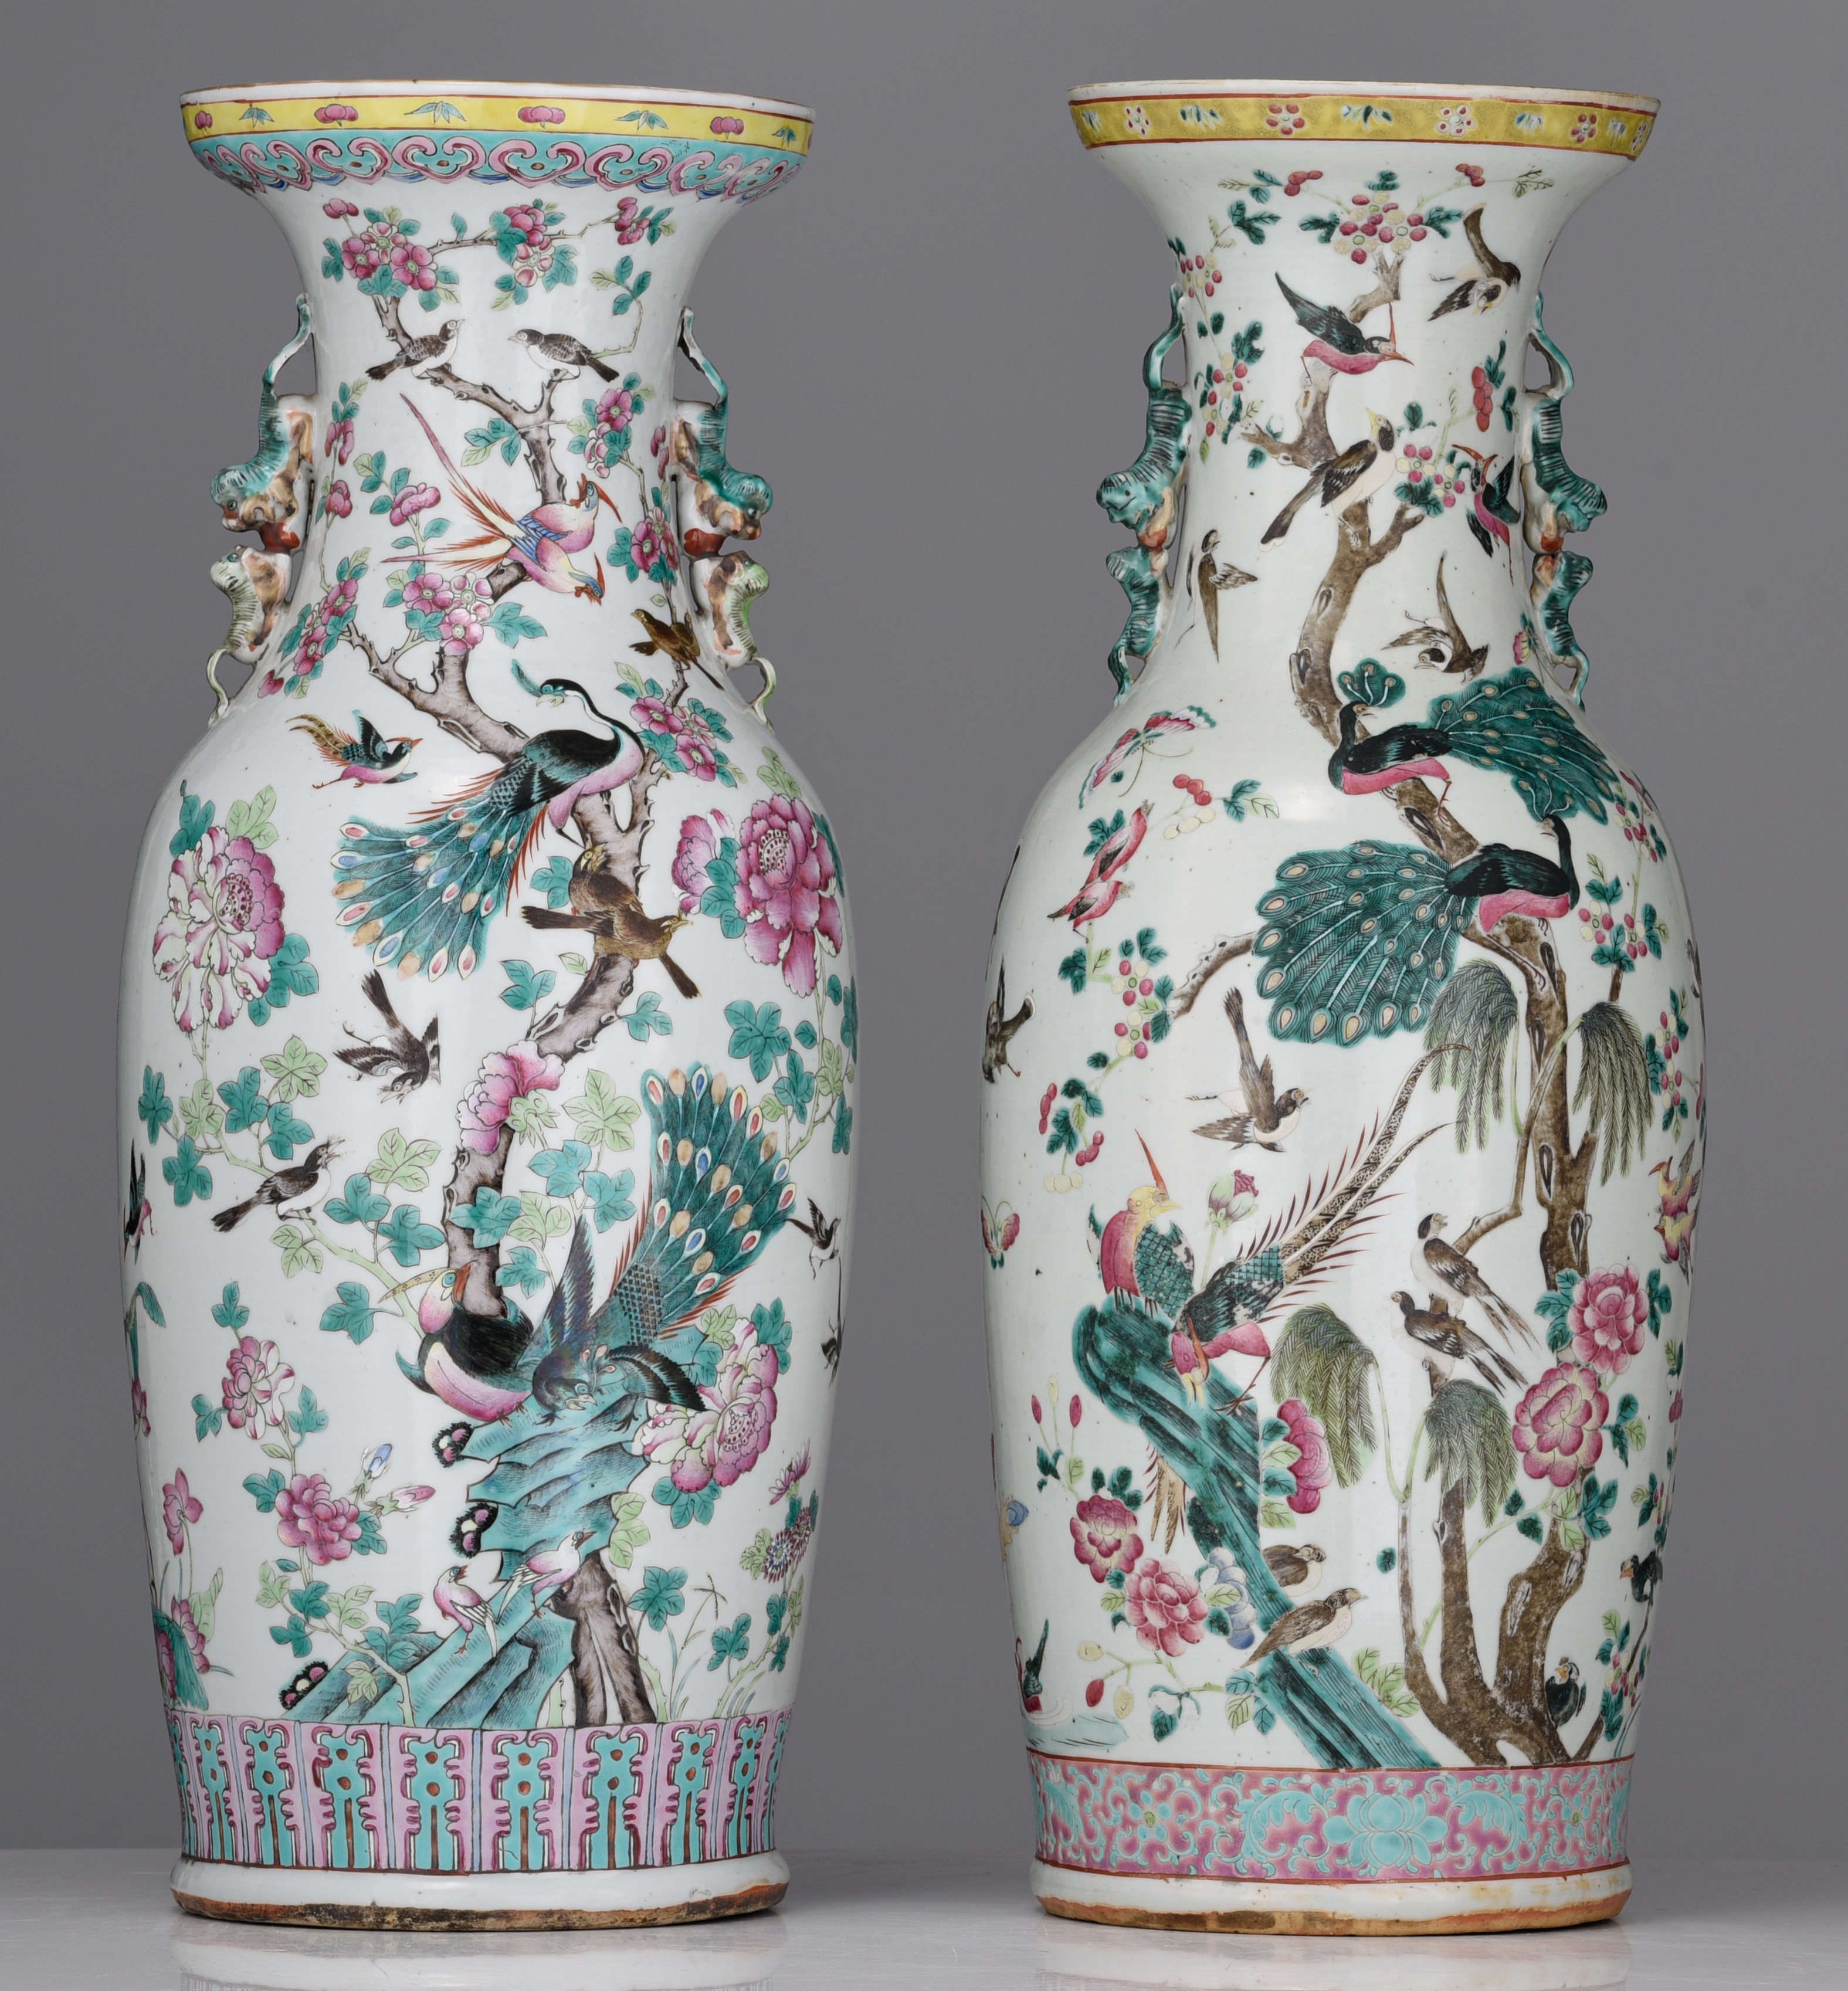 A similar pair of Chinese famille rose 'One Hundred Birds' vases, 19thC, H 62 cm - Image 4 of 7